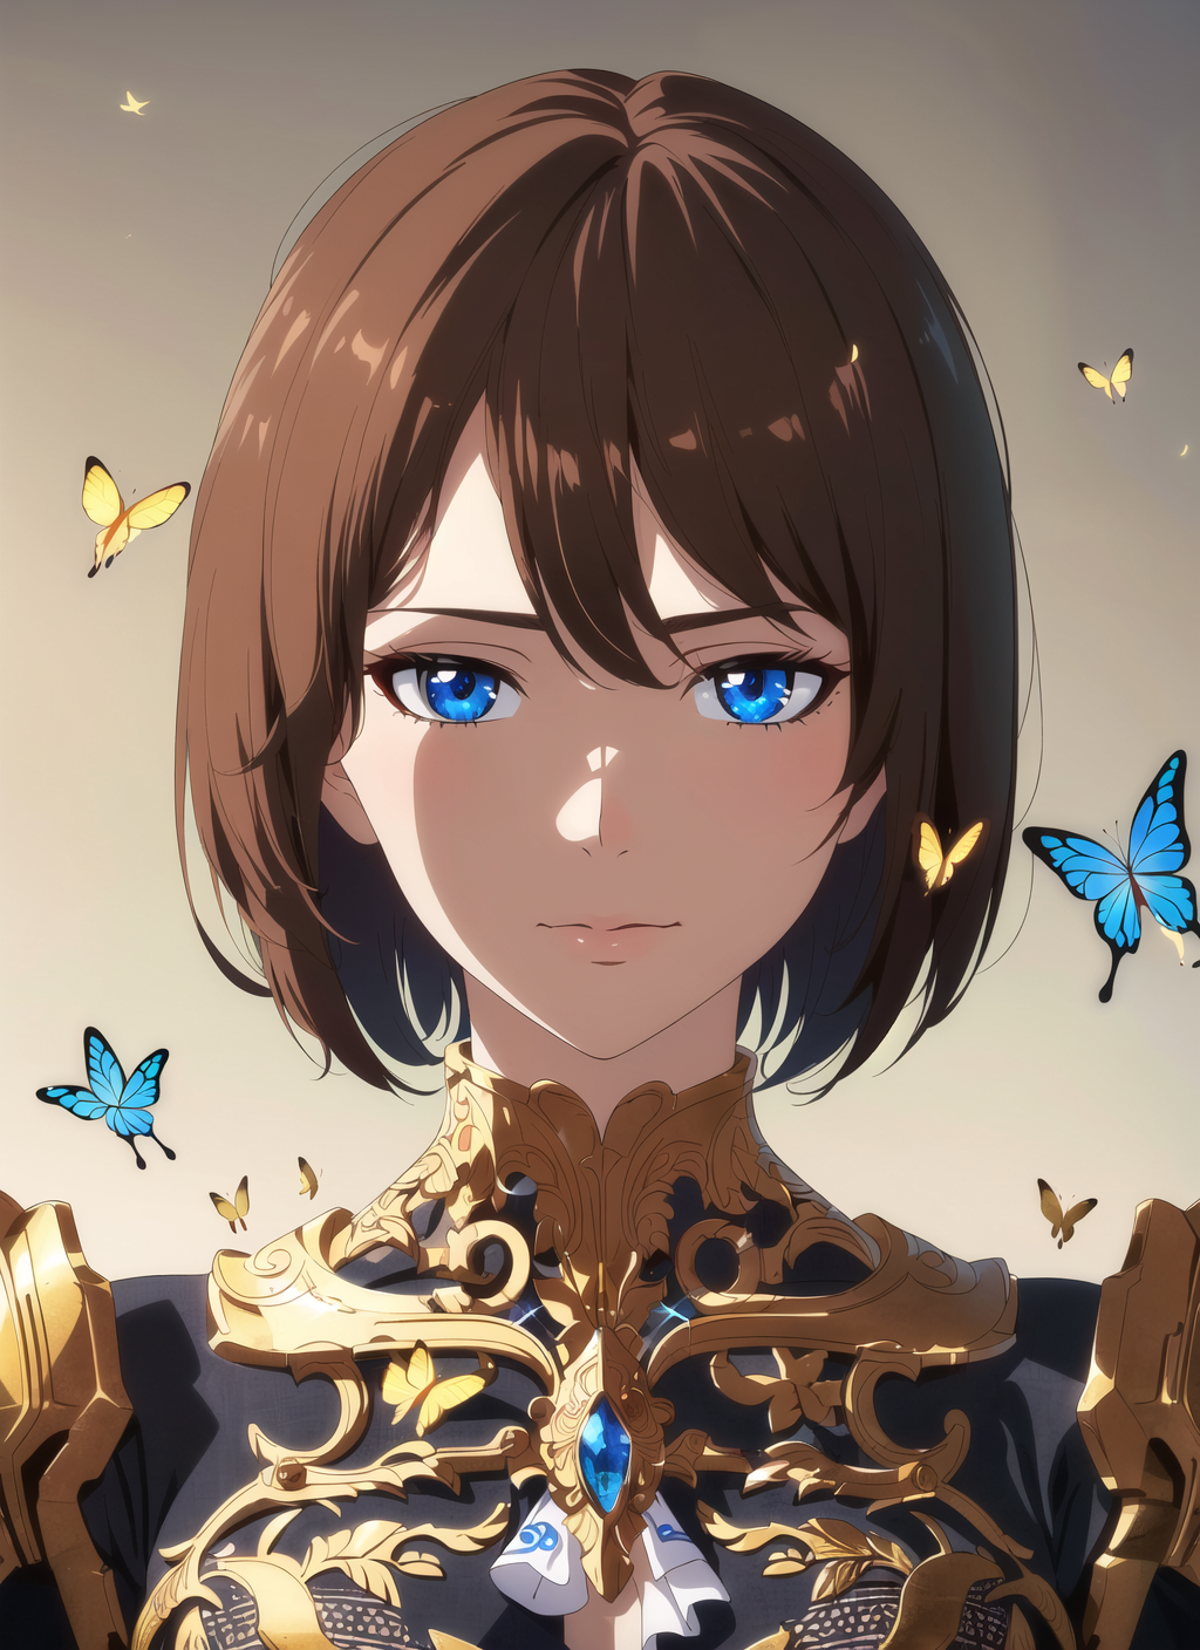 A woman with blue eyes is surrounded by blue butterflies.